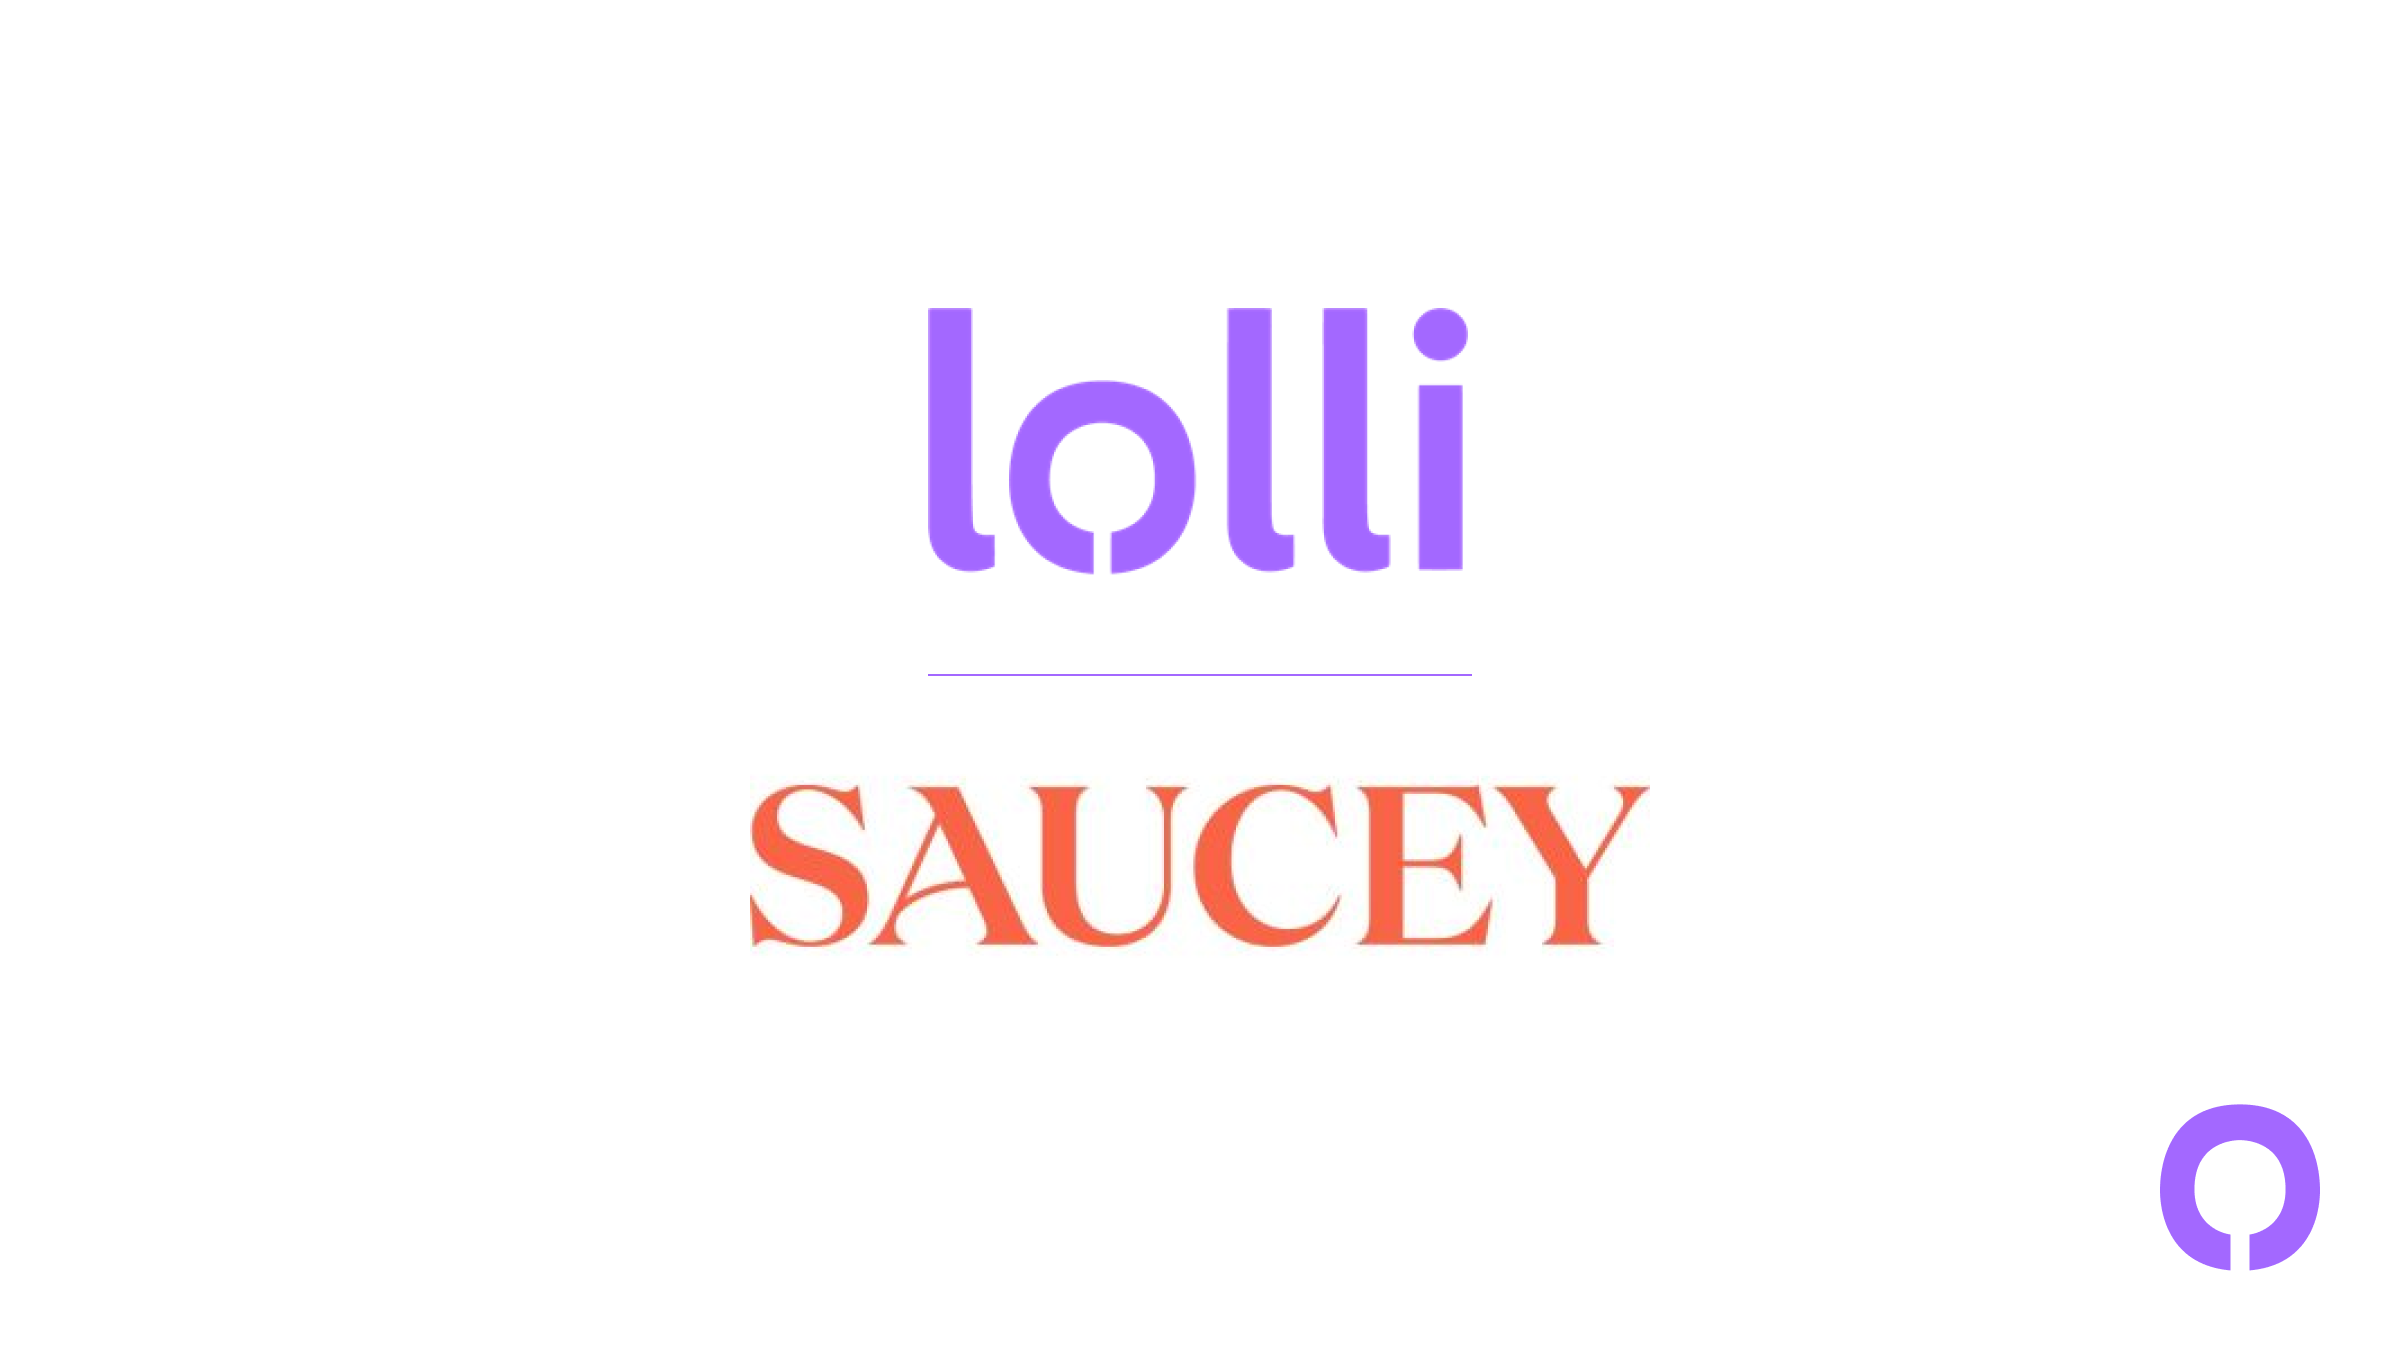 Saucey is Now Live on Lolli!